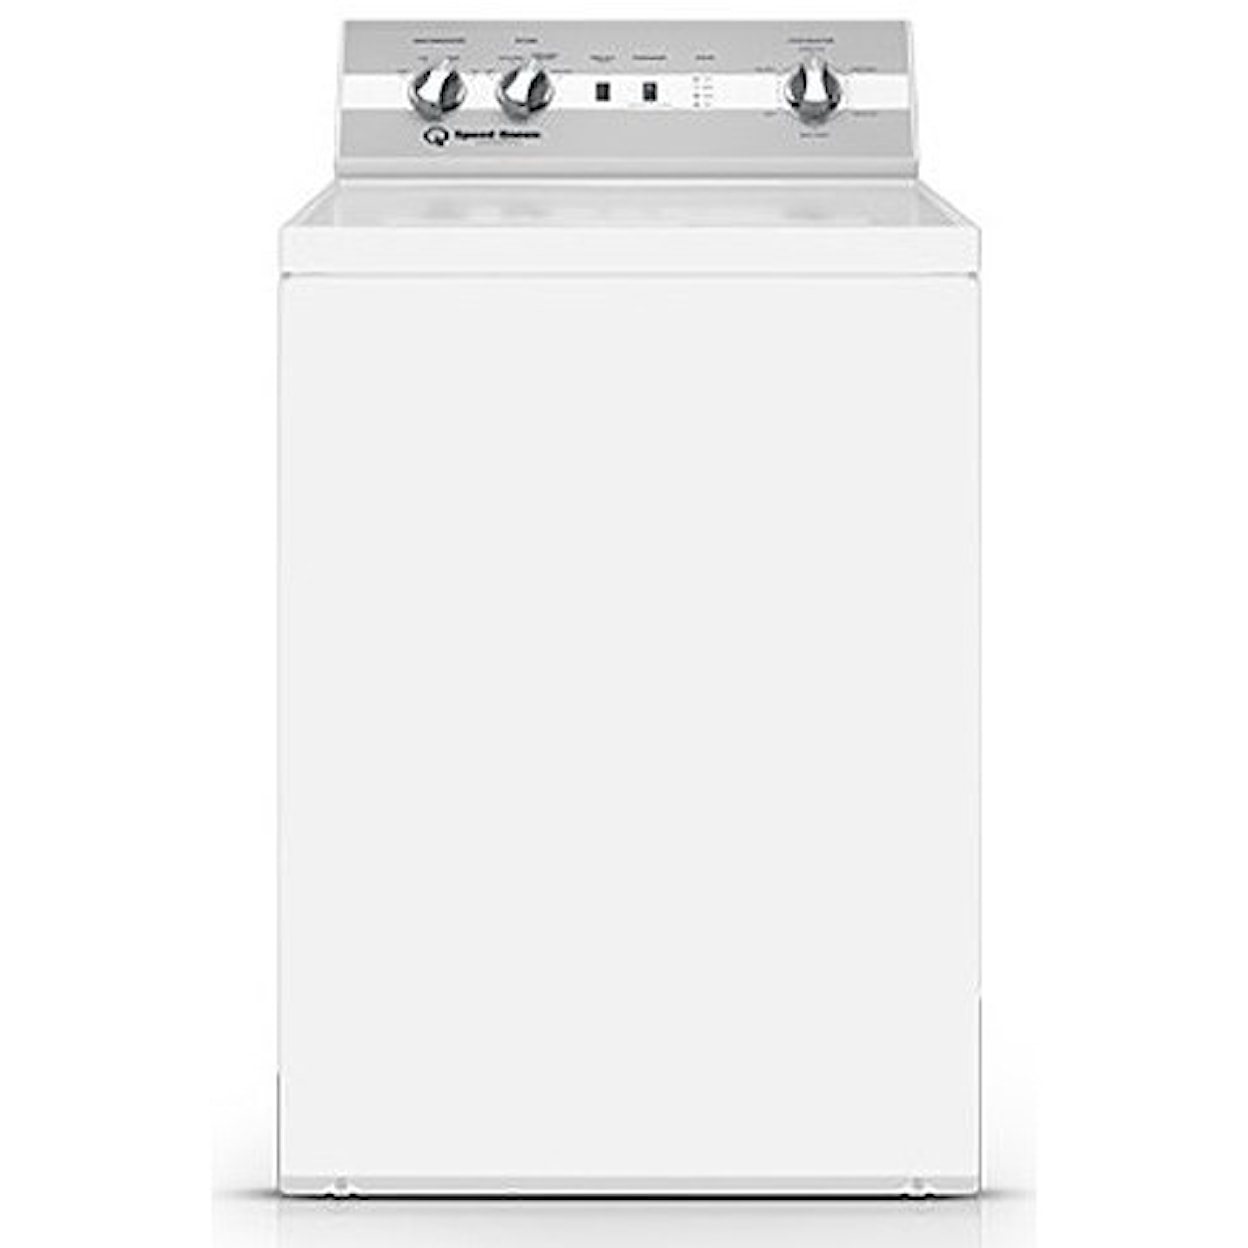 Speed Queen Washers 26" Top Load Washer